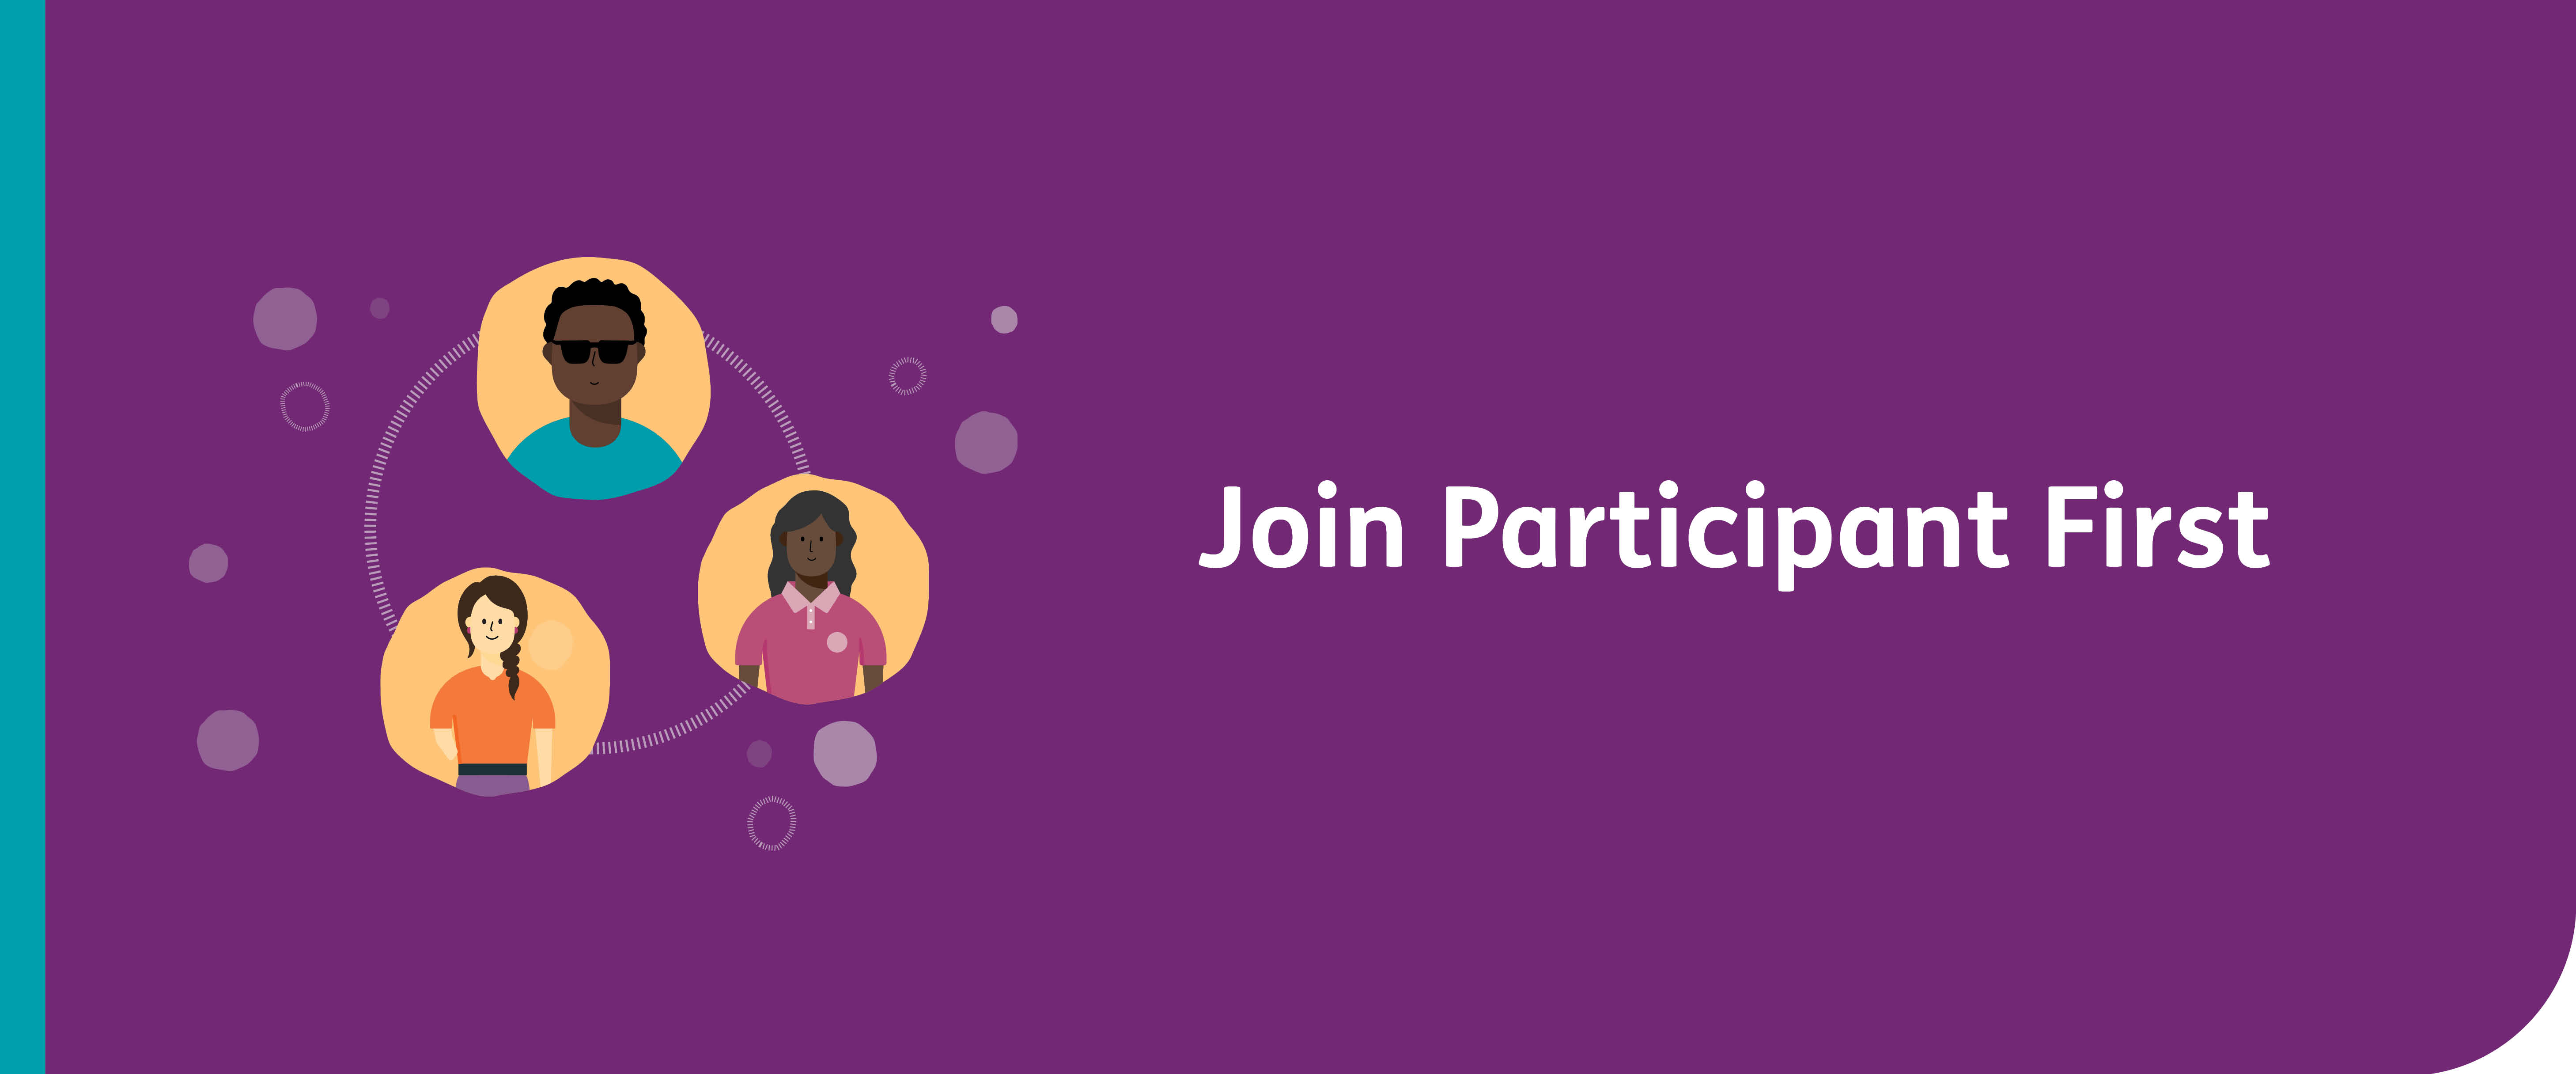 Join Participant First with a cartoon of 3 people connected in circle shapes